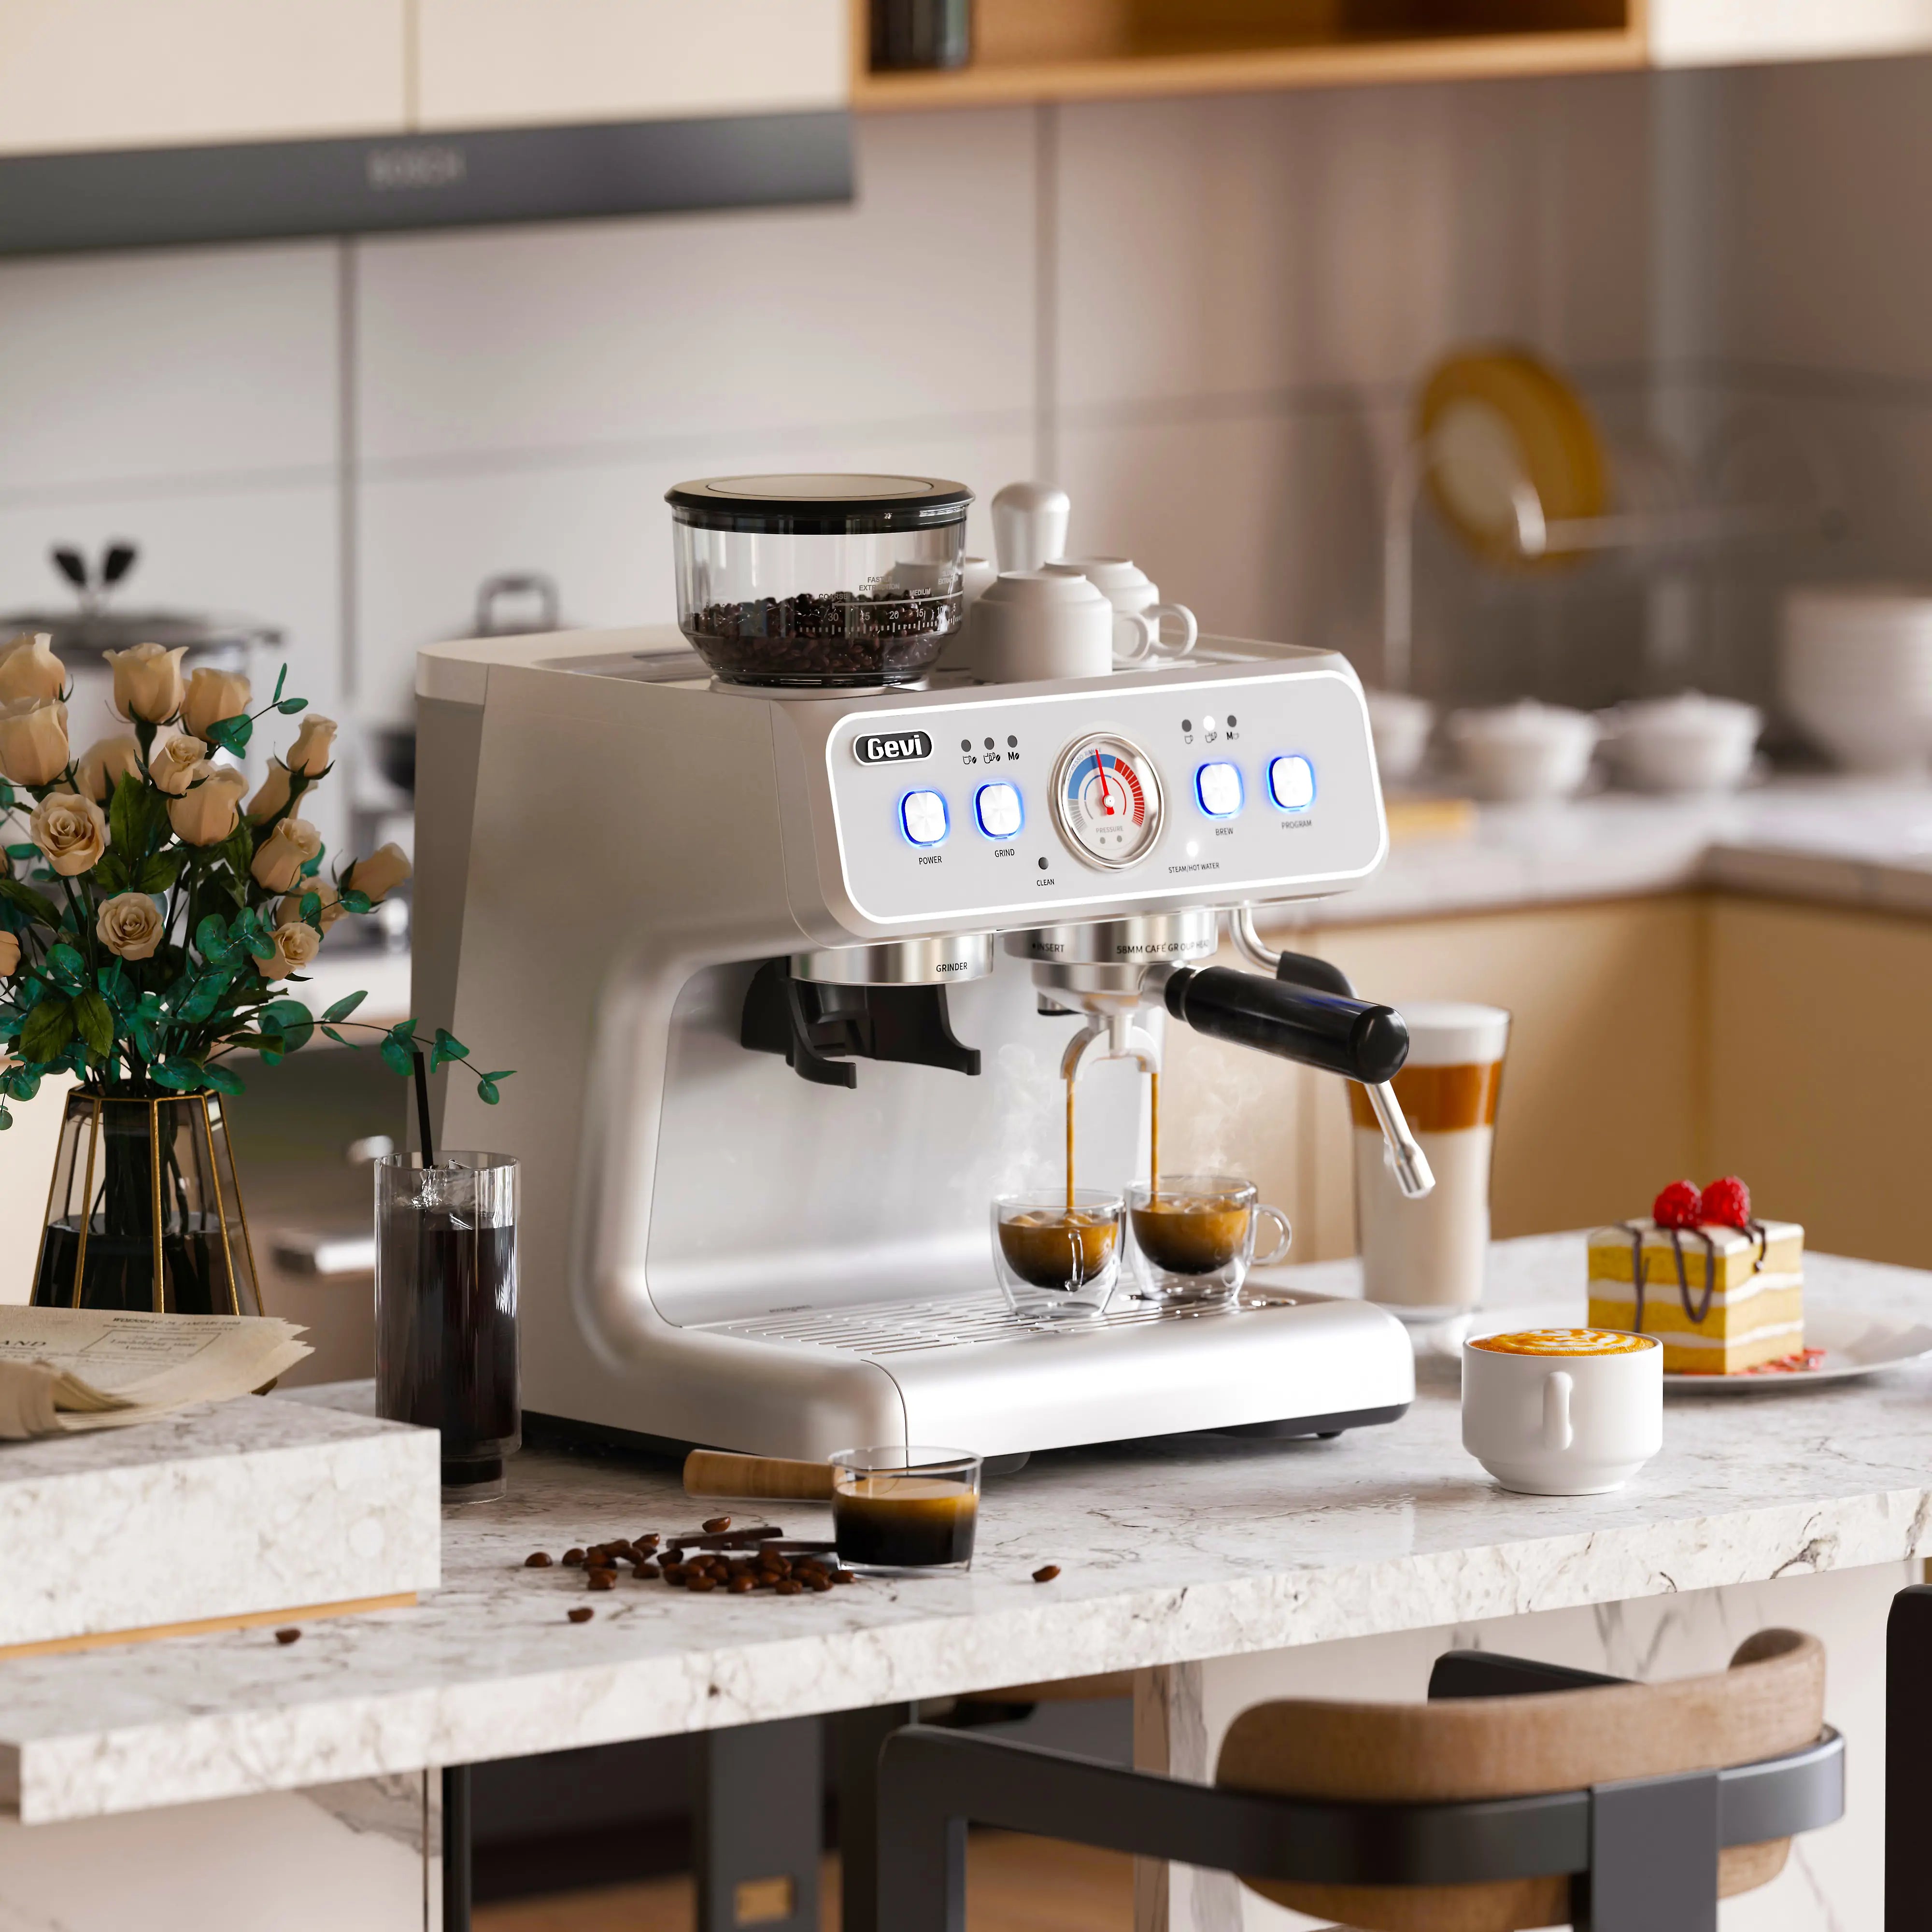 Gevi Espresso Machine with Fast Heating and Milk Frother